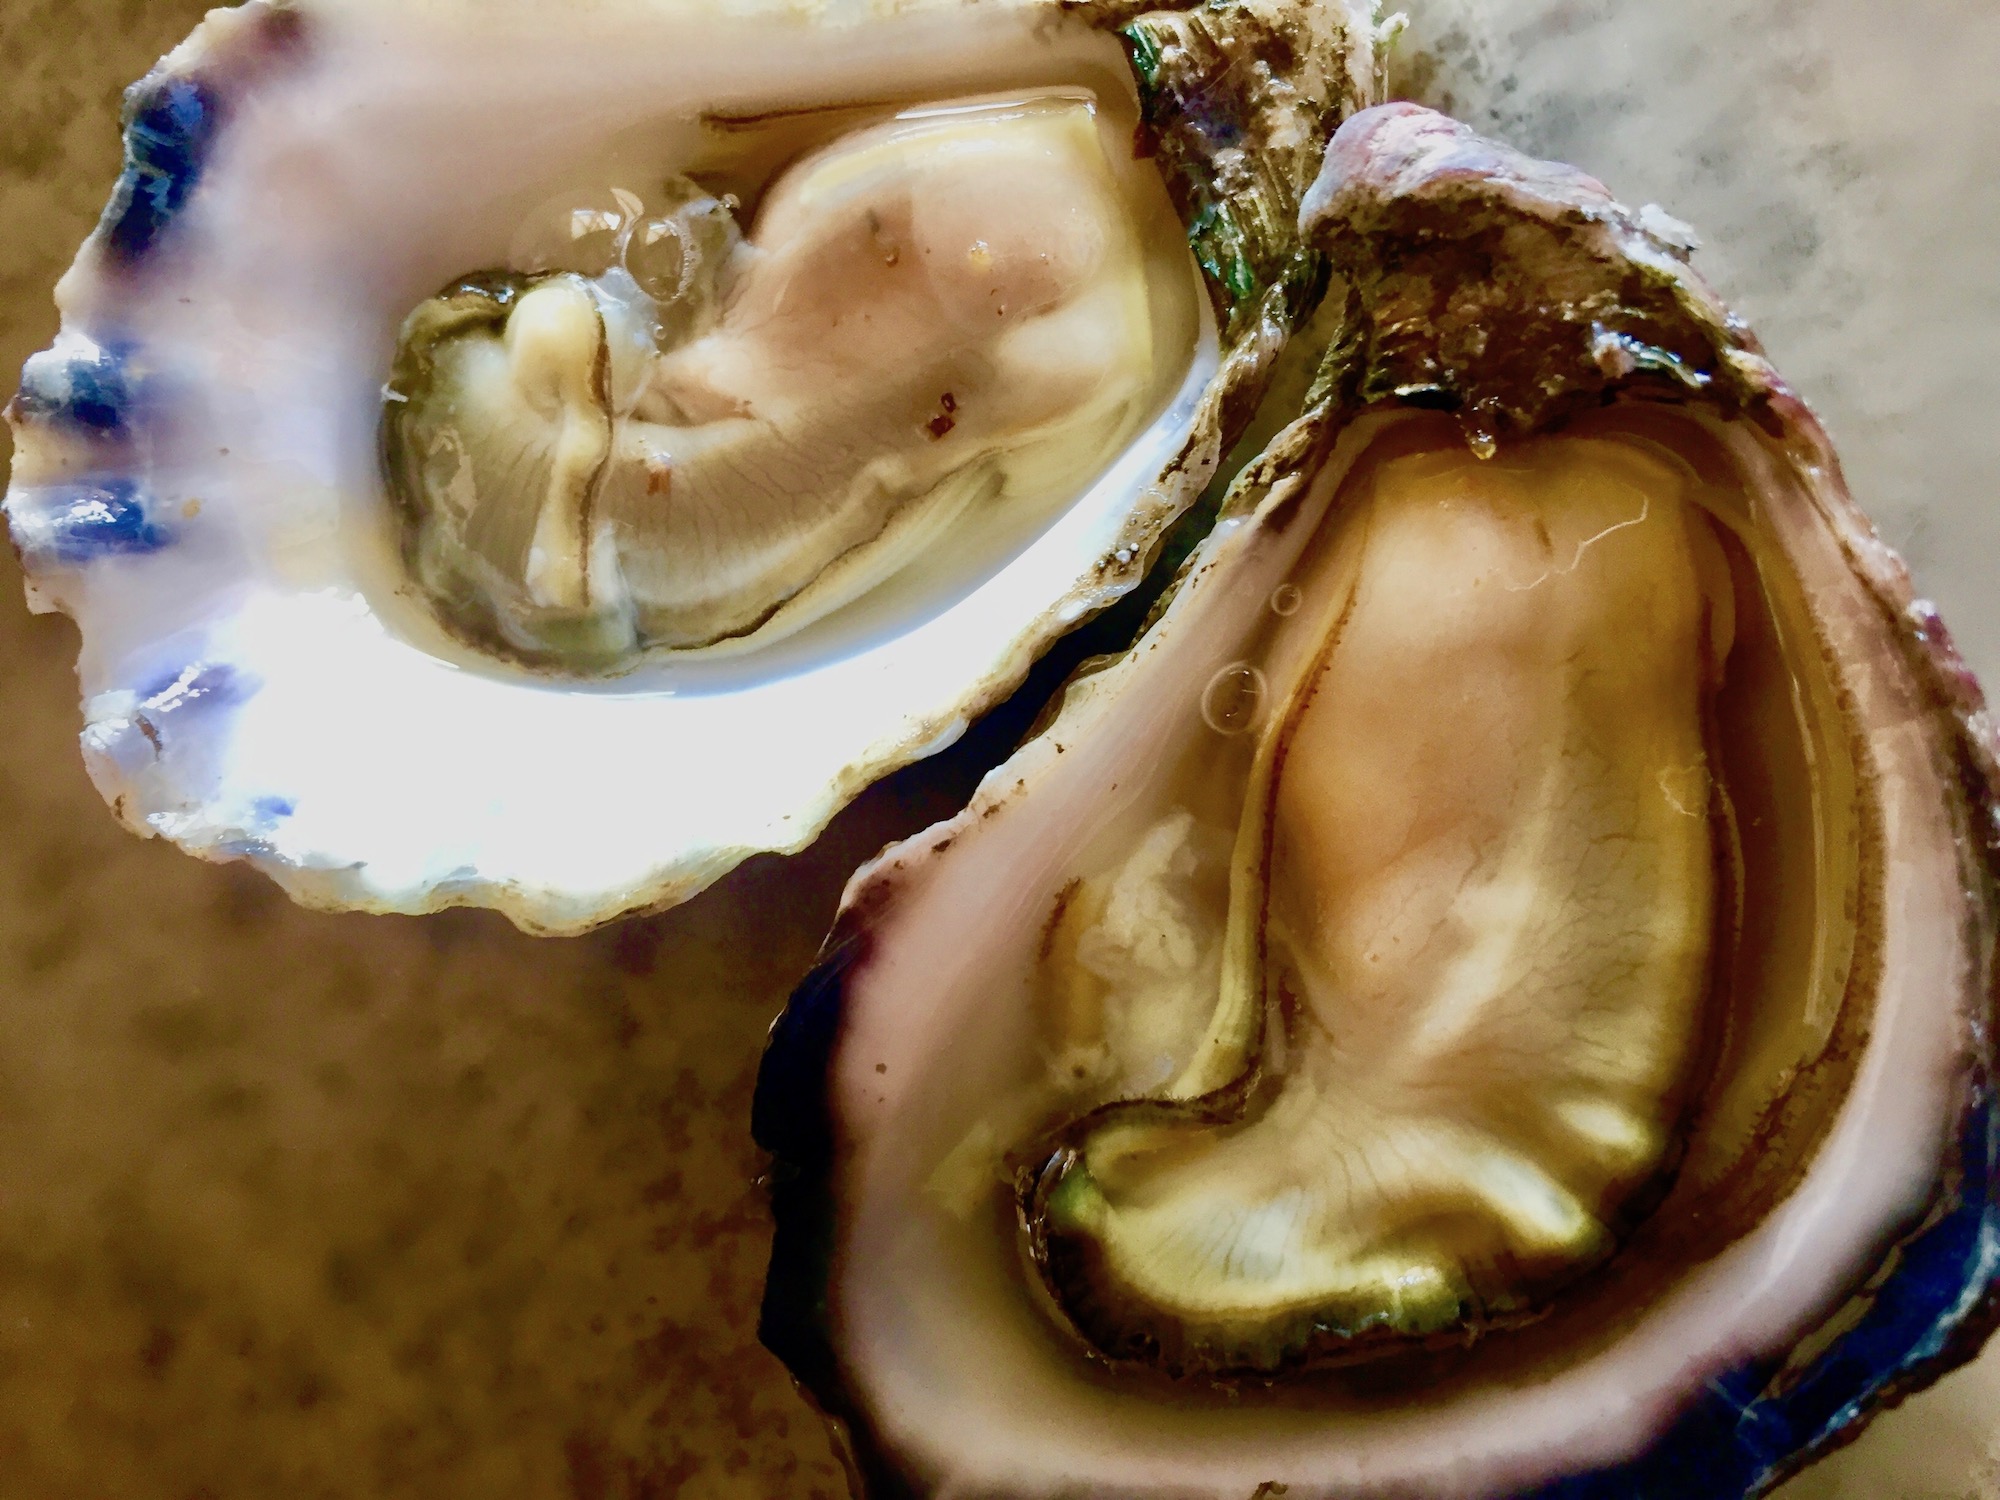 Oyster, how do I love thee? Let me count the ways